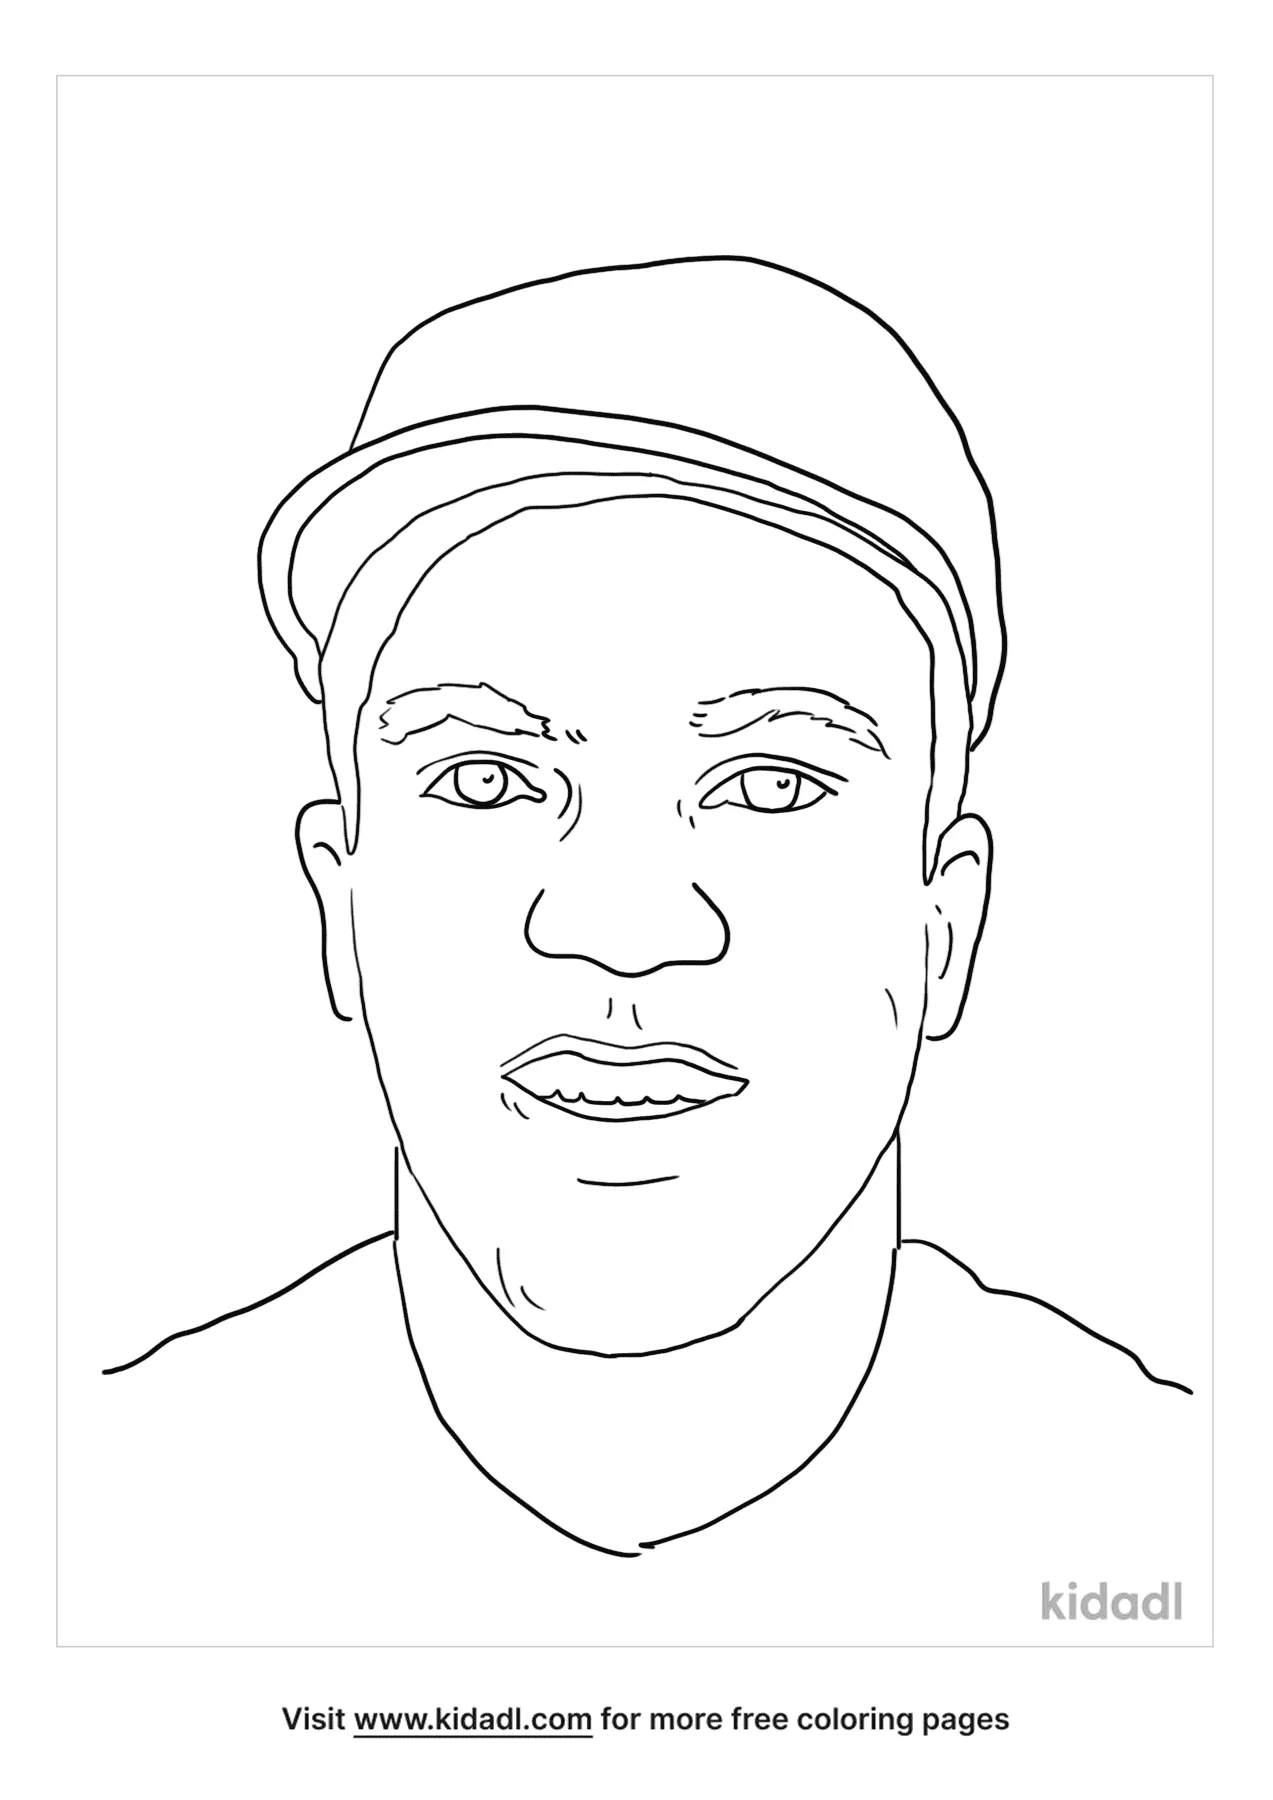 Free jackie robinson coloring page coloring page printables